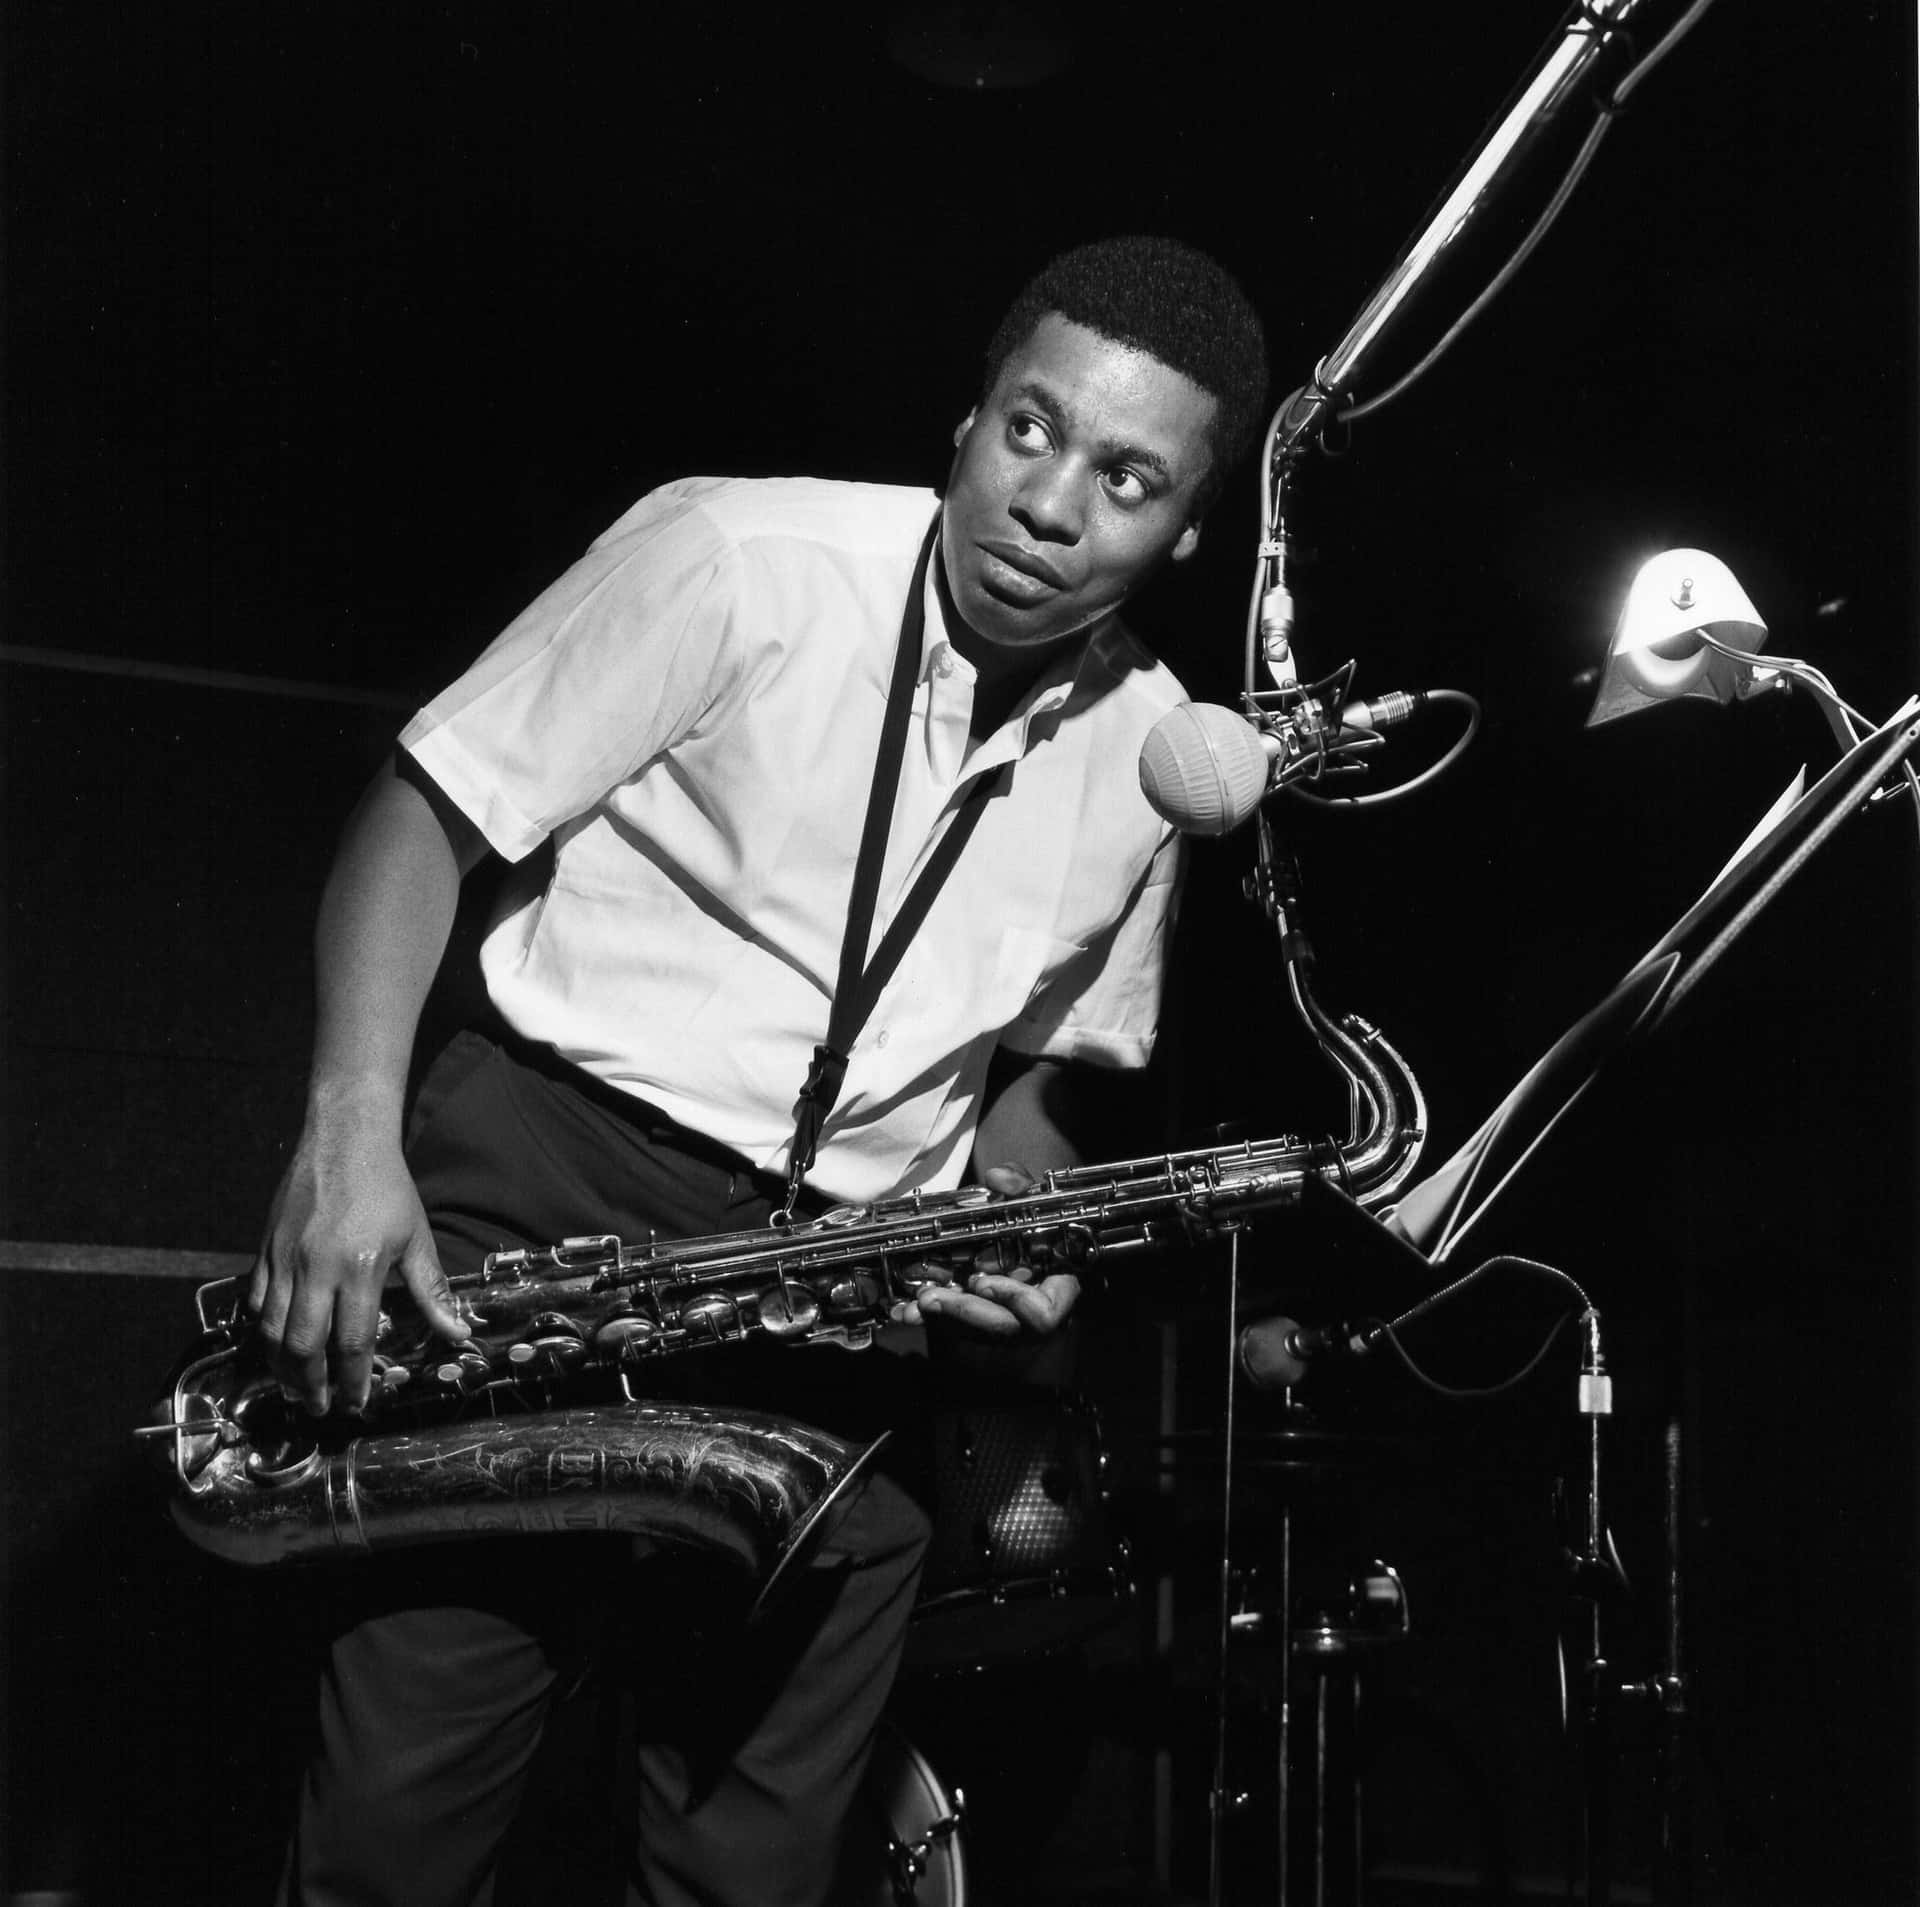 Wayne Shorter performing on stage with his saxophone. Wallpaper